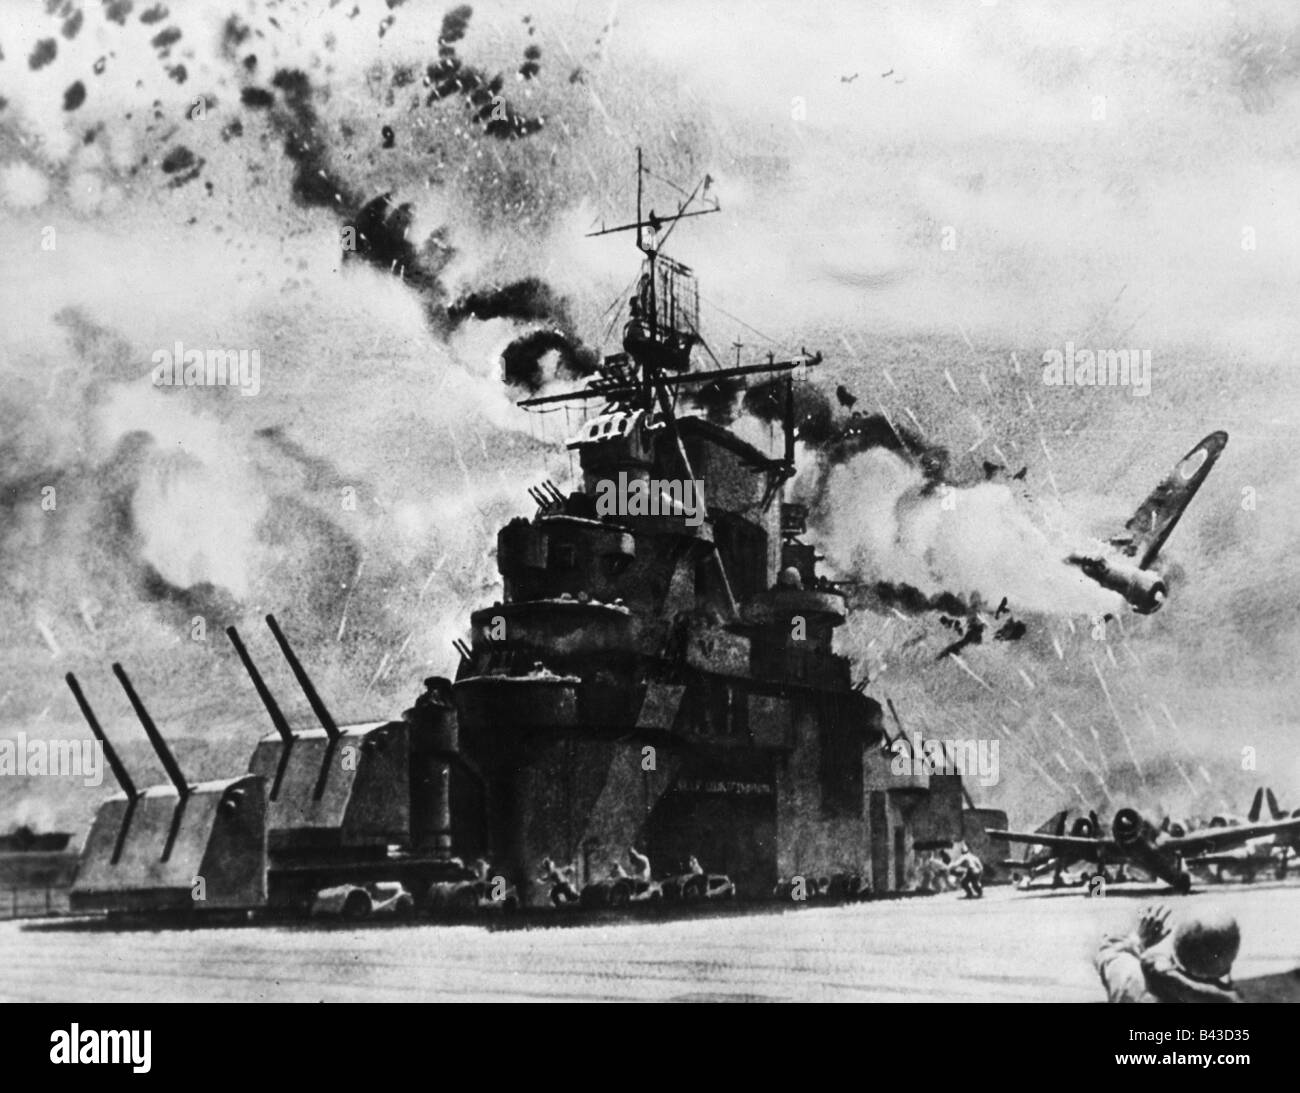 events, Second World War / WW II, Pacific, Santa Cruz Island, Japanese plane attacking the aircraft carrier 'USS Hornet' is hit by AA fire, 26.10.1942, after painting by Dwight C. Chepler, Stock Photo